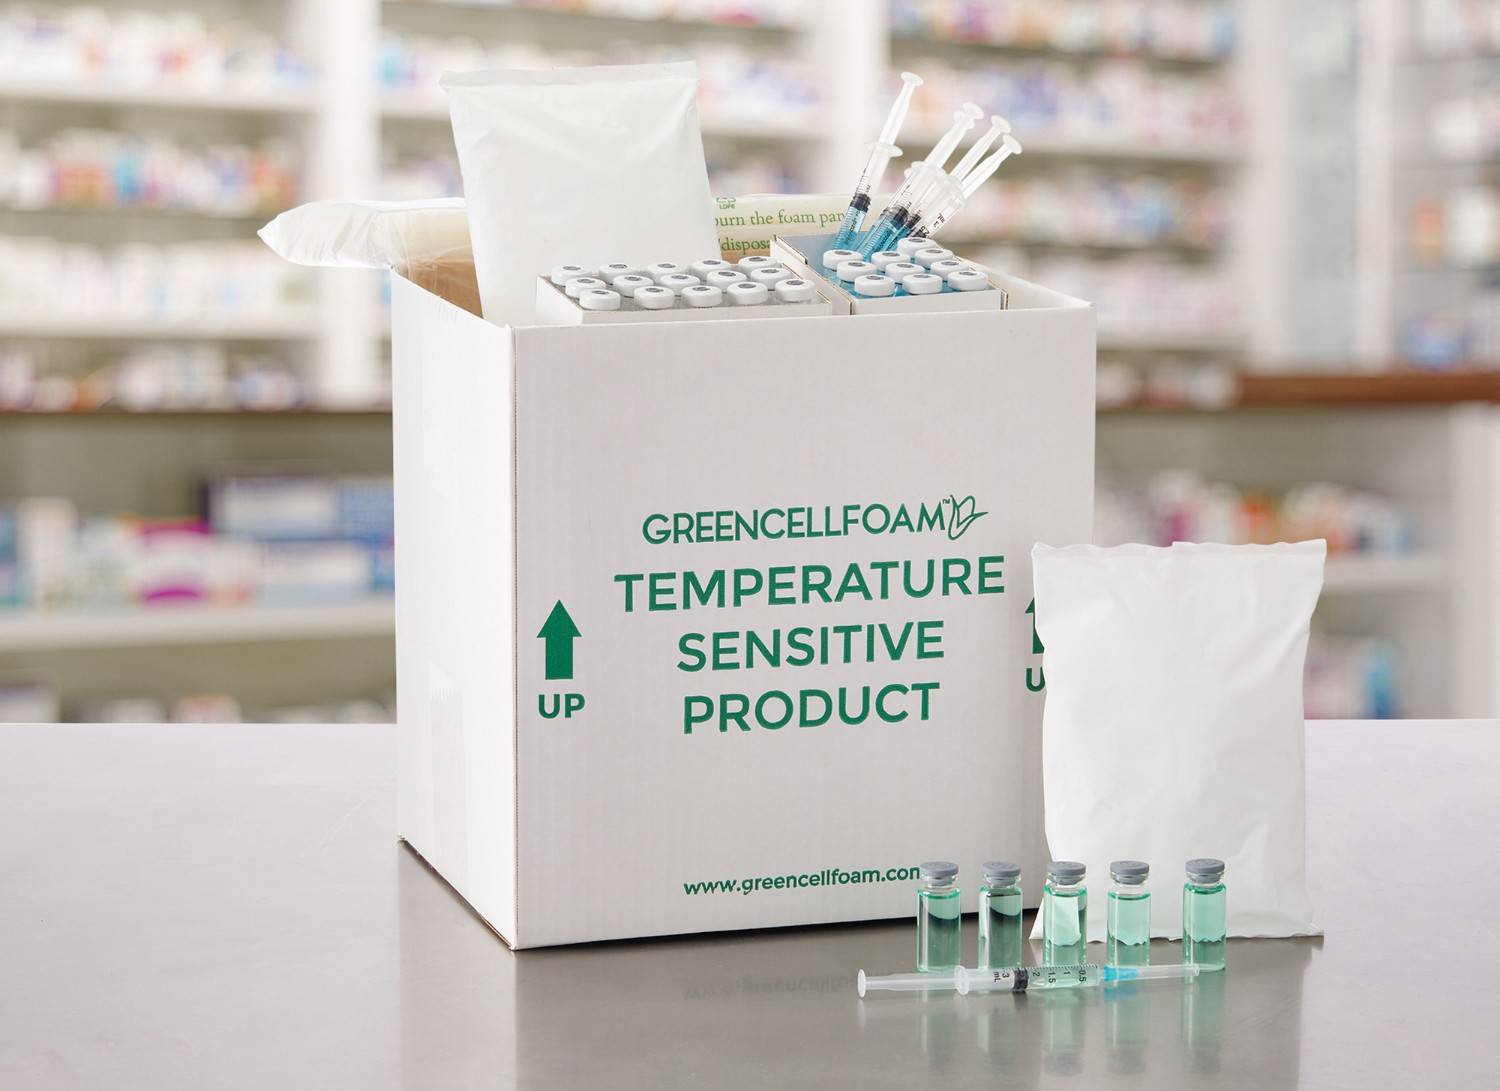 Cold Chain Solution for Life Sciences